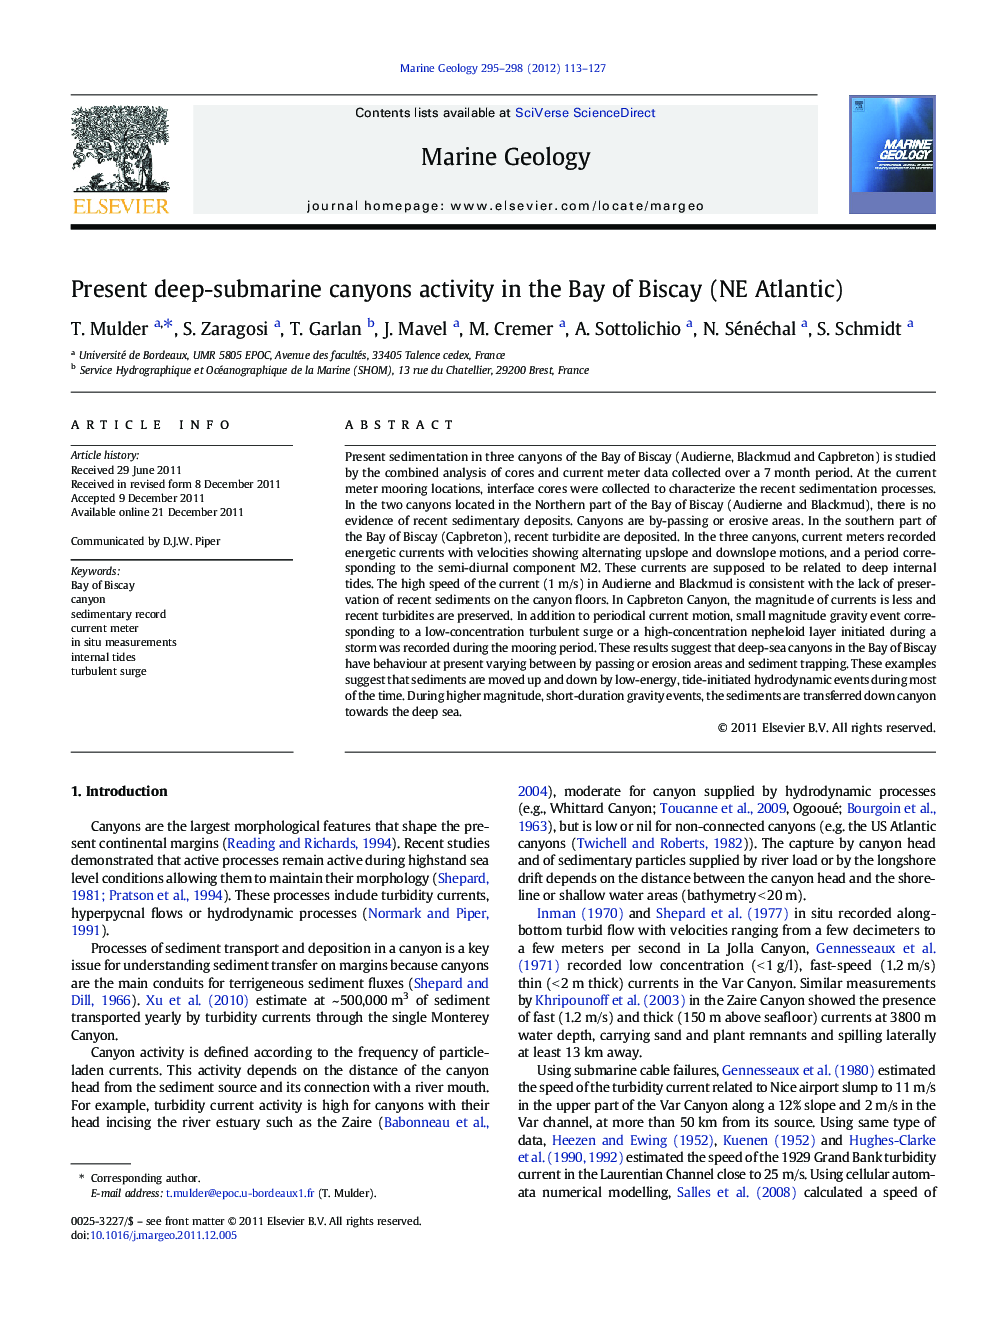 Present deep-submarine canyons activity in the Bay of Biscay (NE Atlantic)